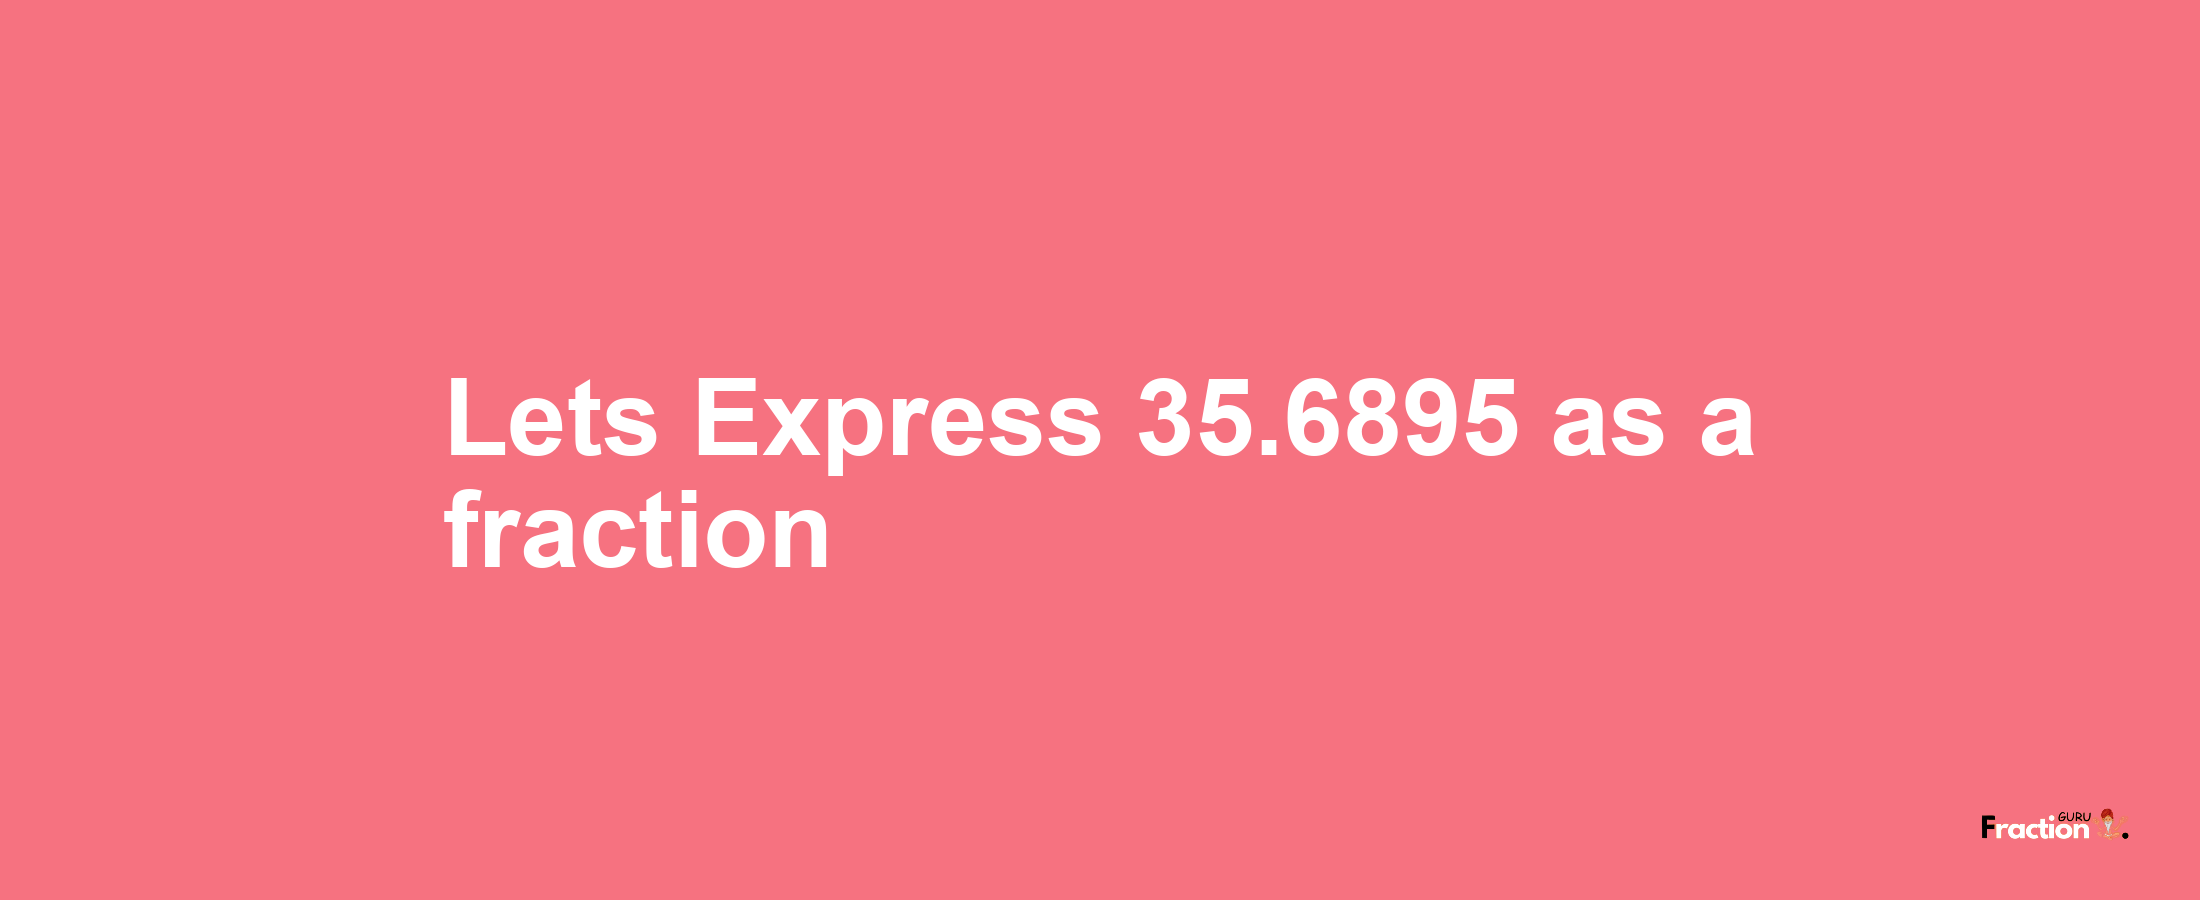 Lets Express 35.6895 as afraction